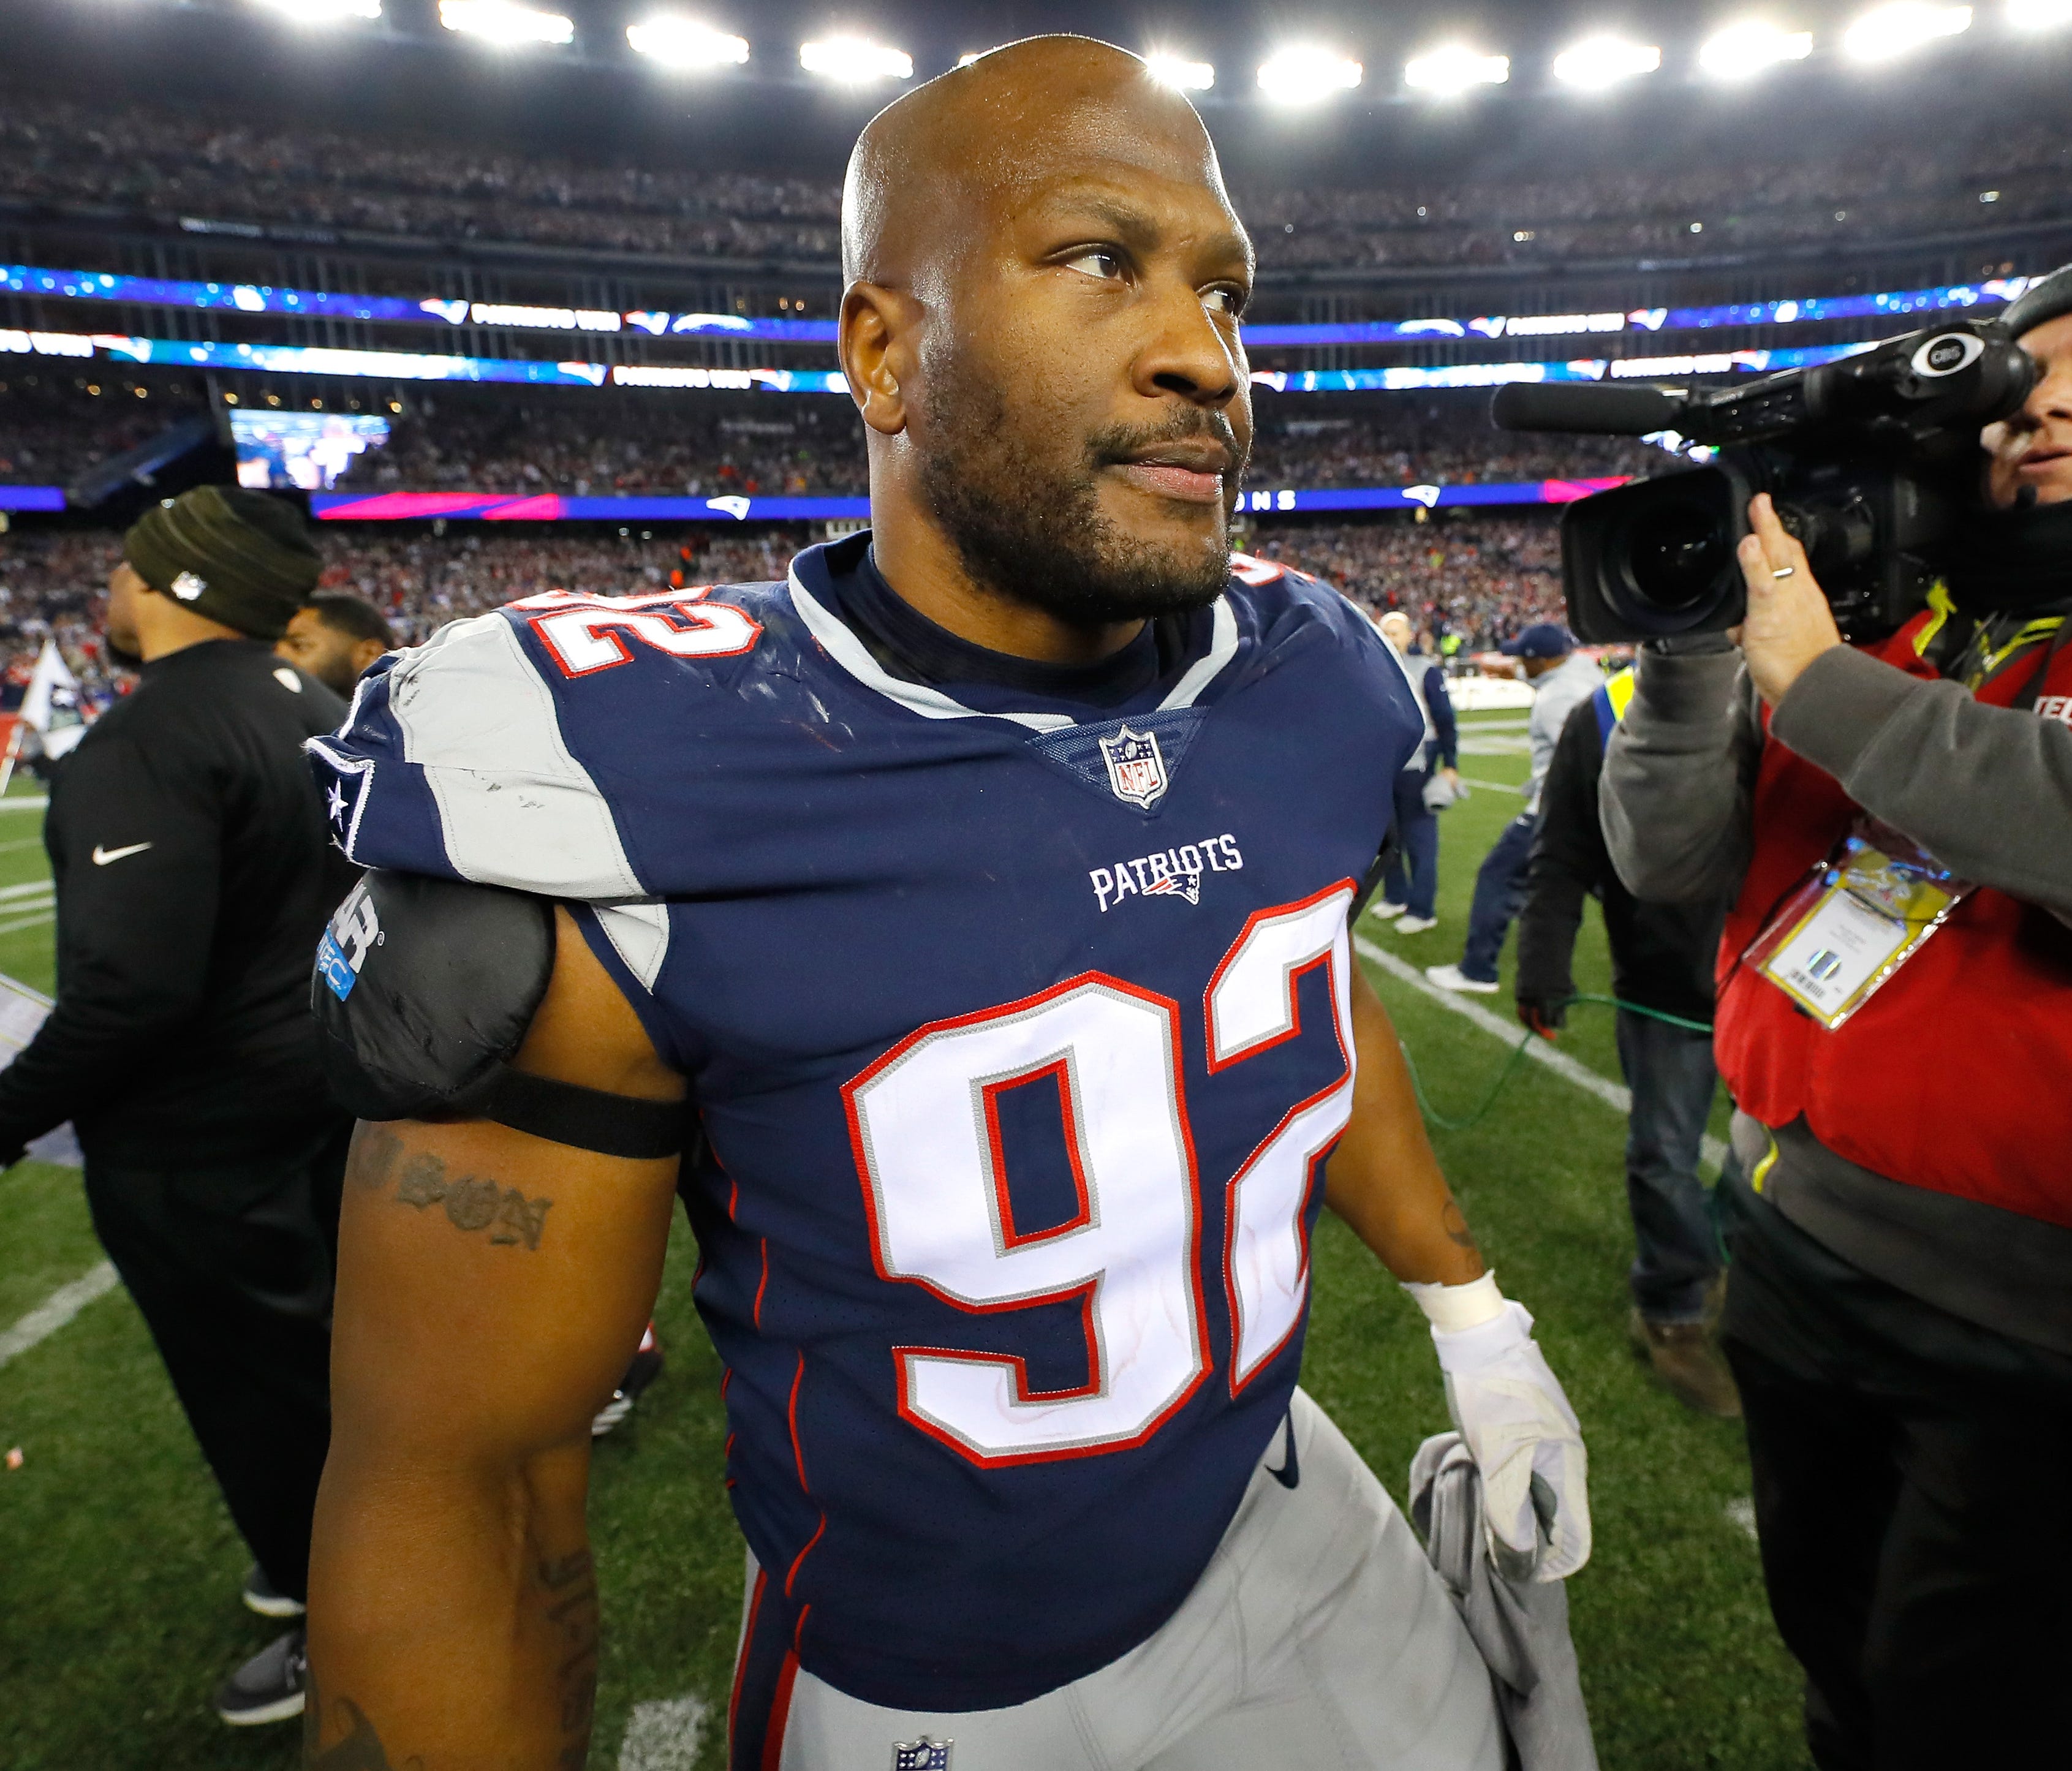 FOXBOROUGH, MA - JANUARY 21: James Harrison #92 of the New England Patriots reacts after the AFC Championship Game against the Jacksonville Jaguars at Gillette Stadium on January 21, 2018 in Foxborough, Massachusetts.  (Photo by Kevin C. Cox/Getty Im